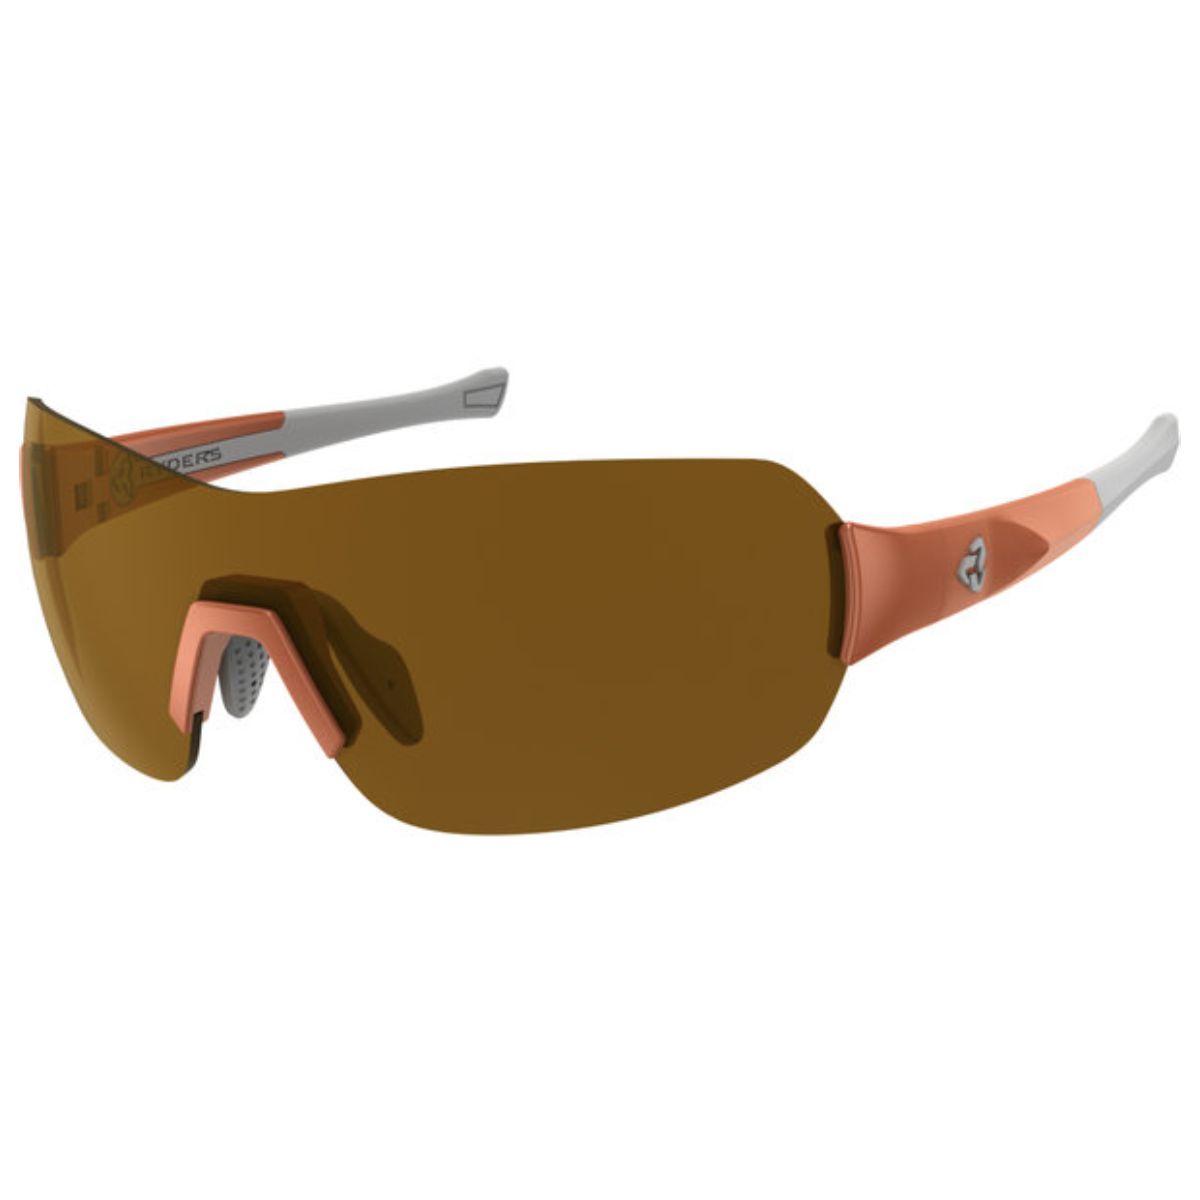 Ryders Pace Orange/White Sunglasses - Brown Lens